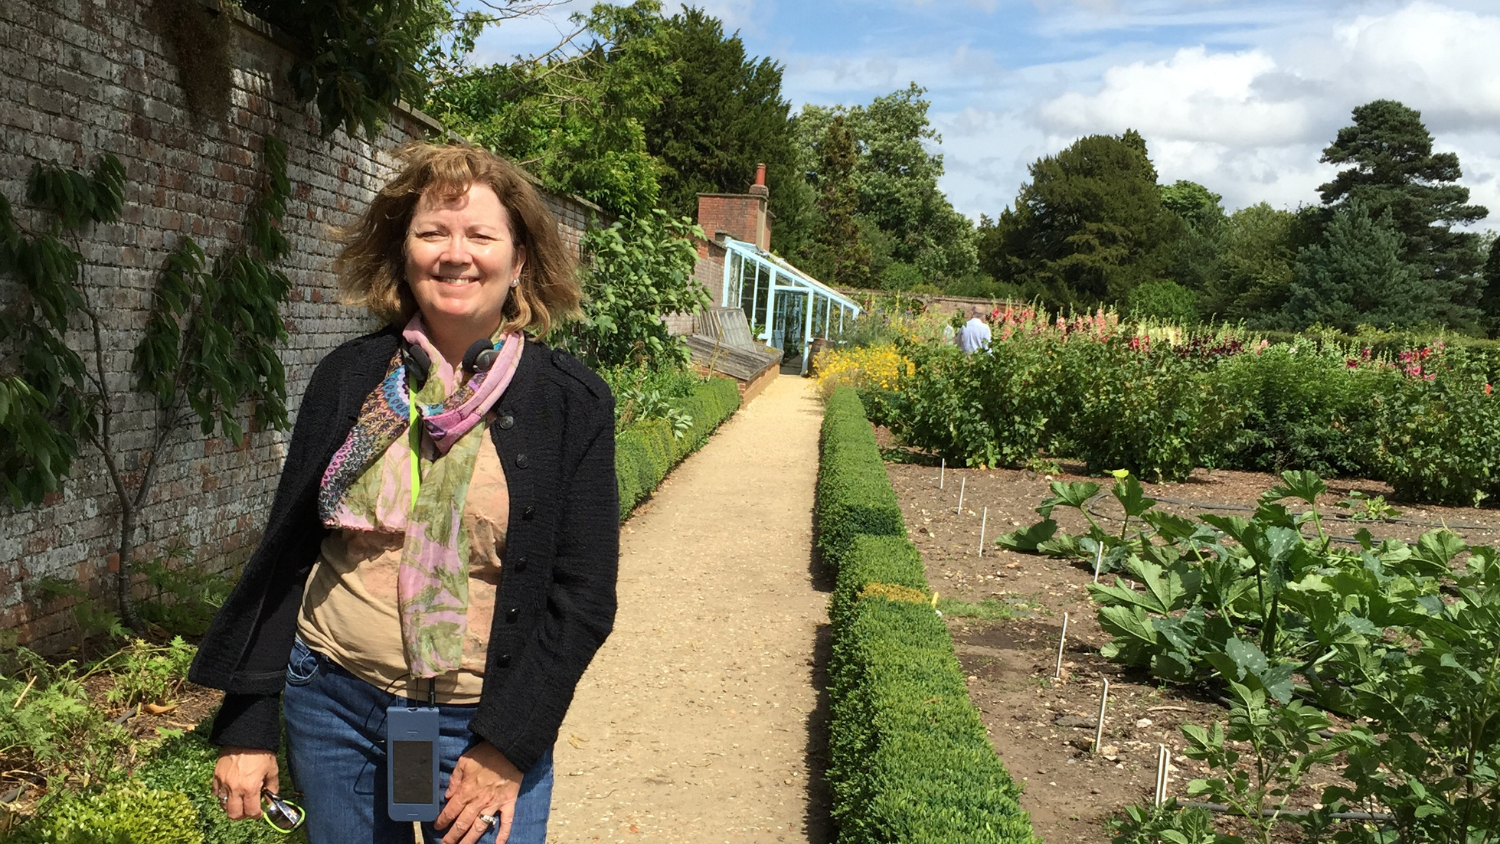 Dr. Jean Ristaino stands next to potato plots in the backyard of Down House, Charles Darwin’s home.